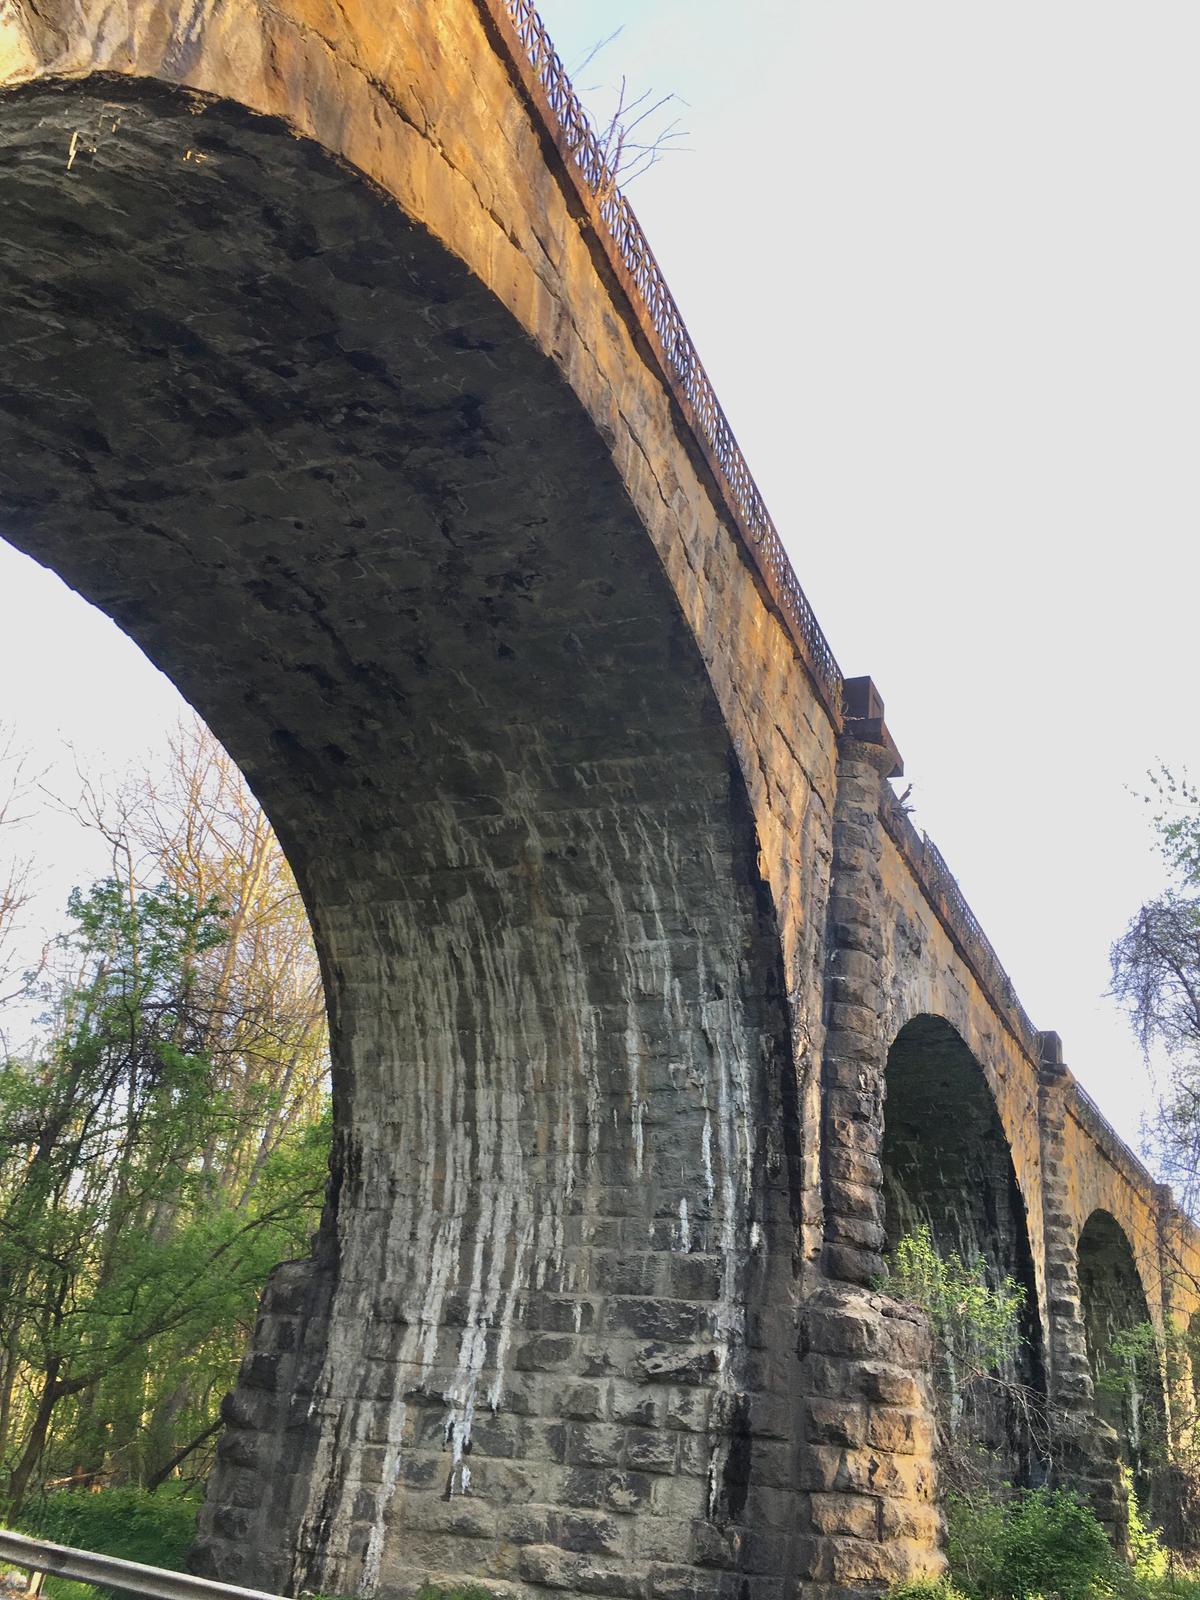 Completed in 1835, the Thomas Viaduct was the first bridge of its type, a curved bridge with multiple Roman arches. (Bob Kirchman)